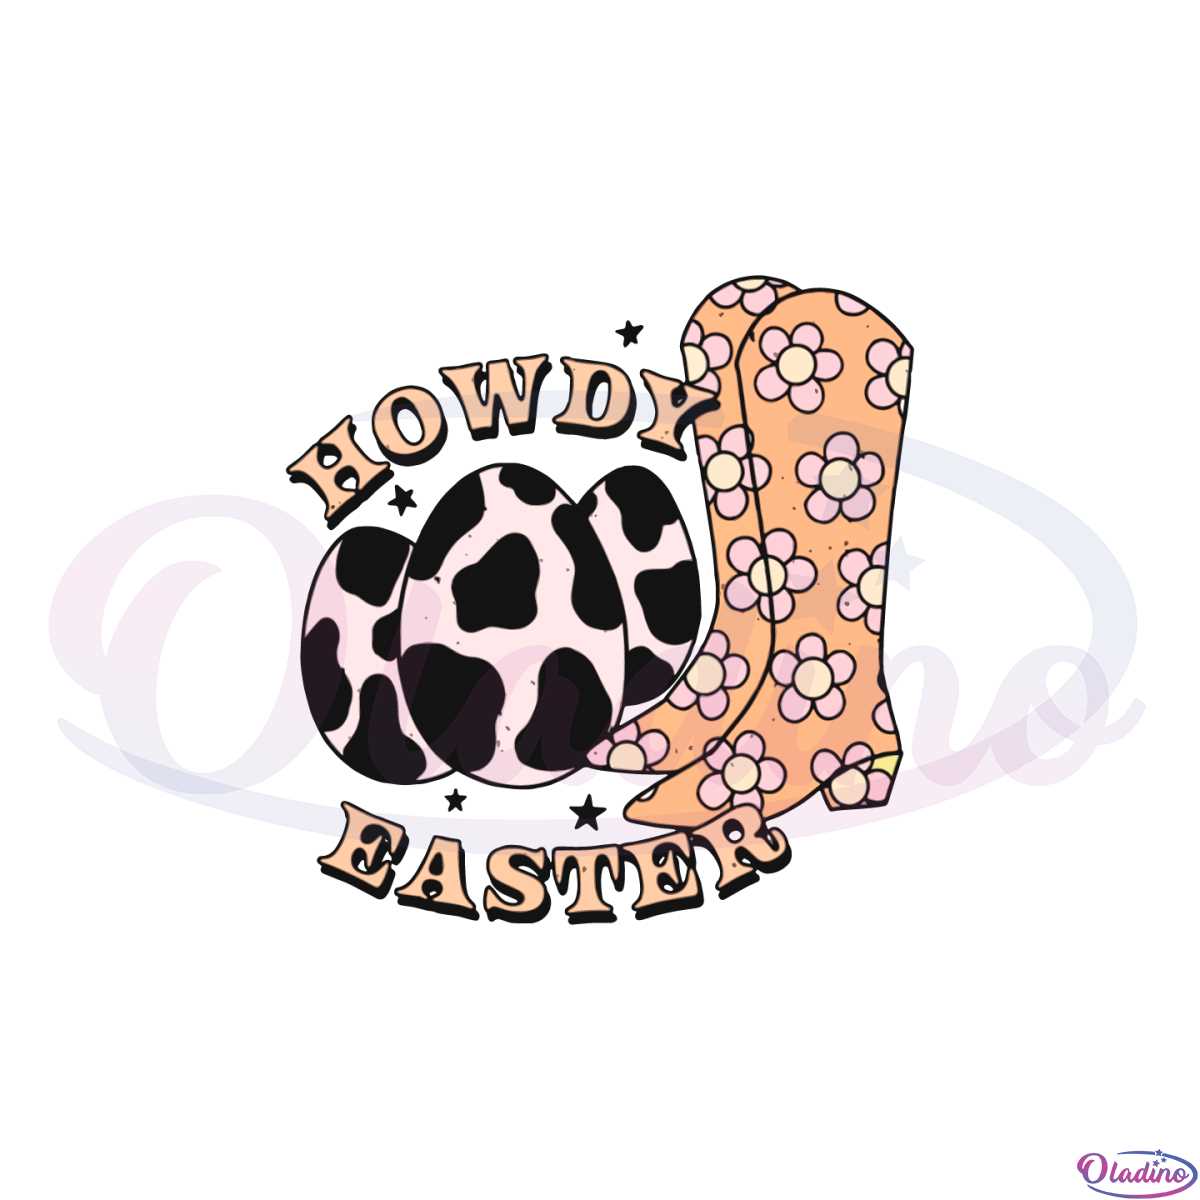 Howdy Easter Cowgirl Boots Grovy Easter Egg SVG Cutting Files
#oladinosvg #trending #design #Cricut #easterday #easterdaysvg #svgfile #digital #graphic #cuttingfiles 
🛒: oladino.com/product/howdy-…